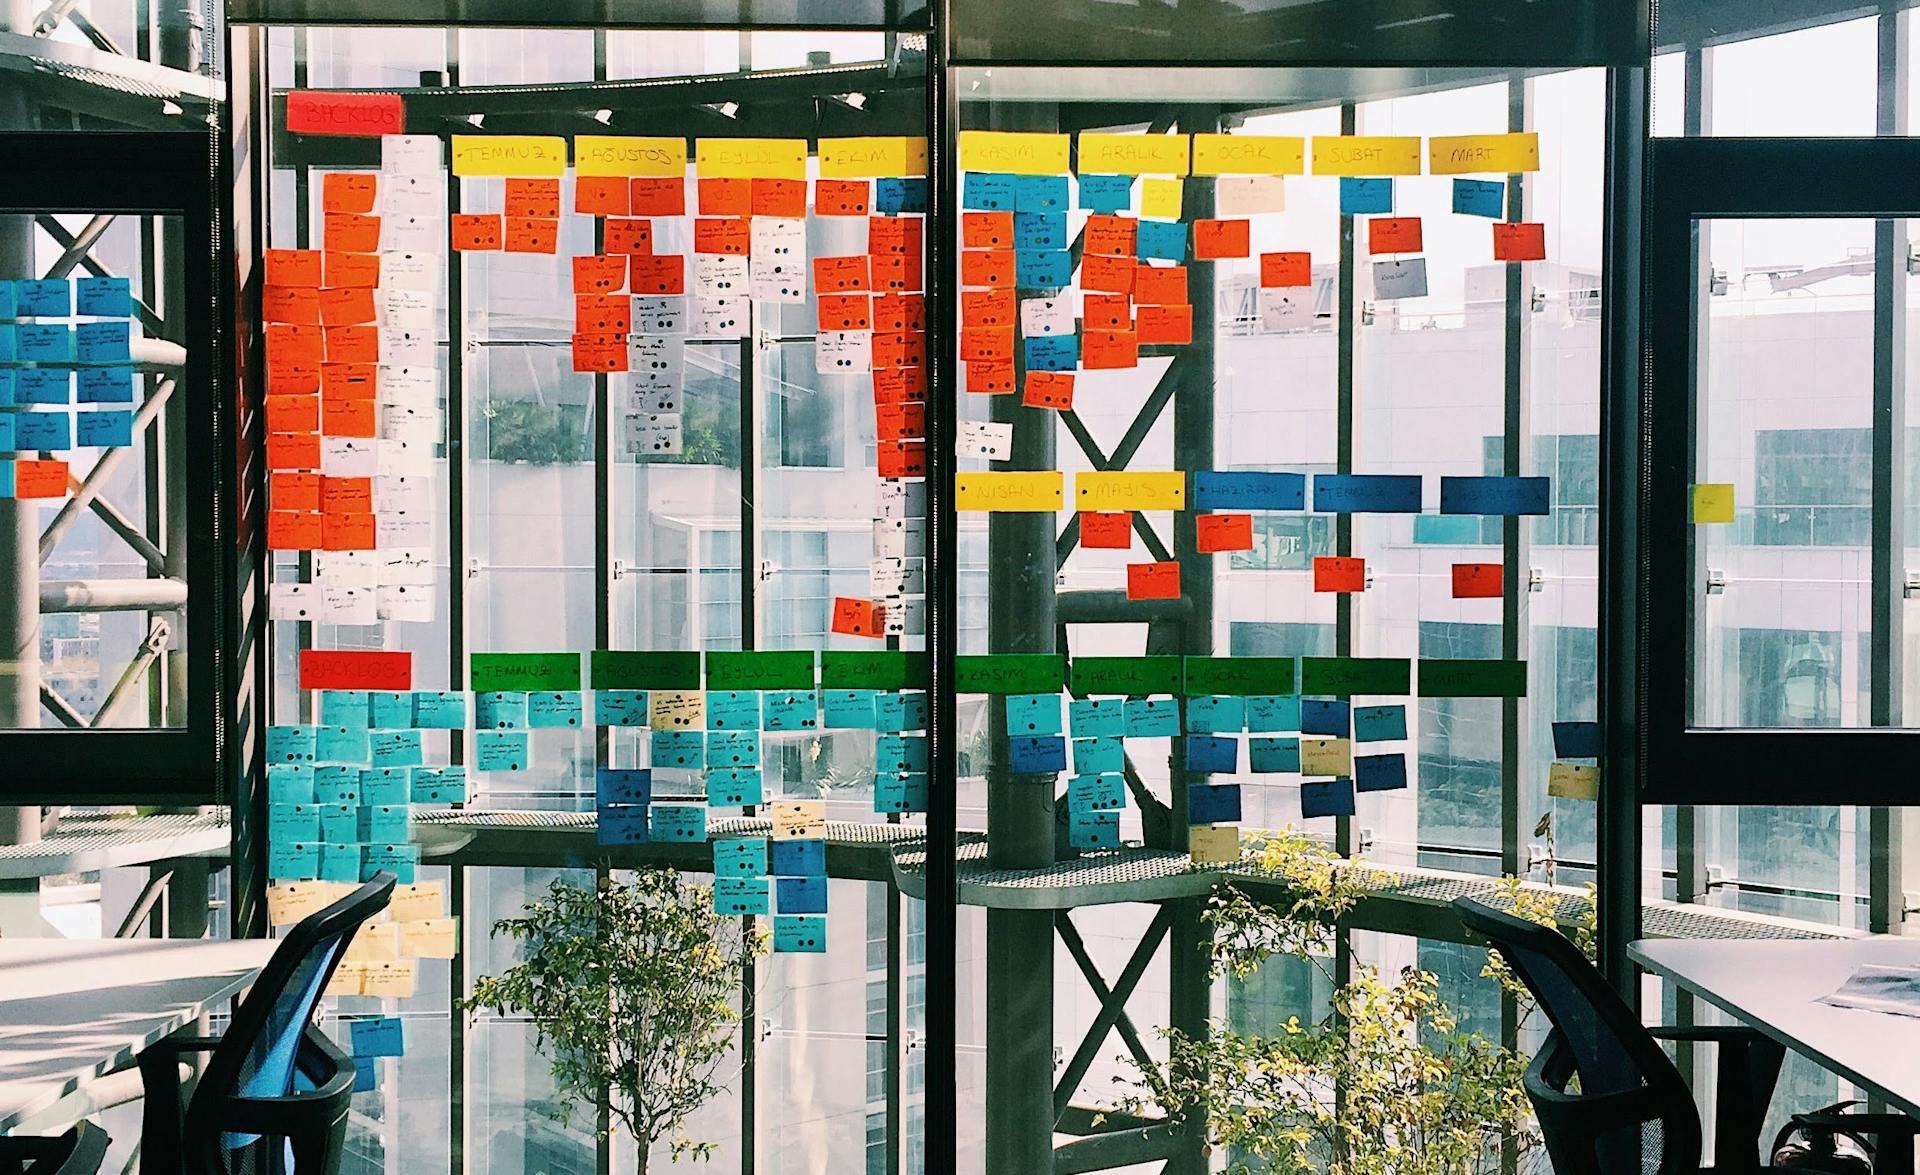 Large windows with post-it notes arranged in a board